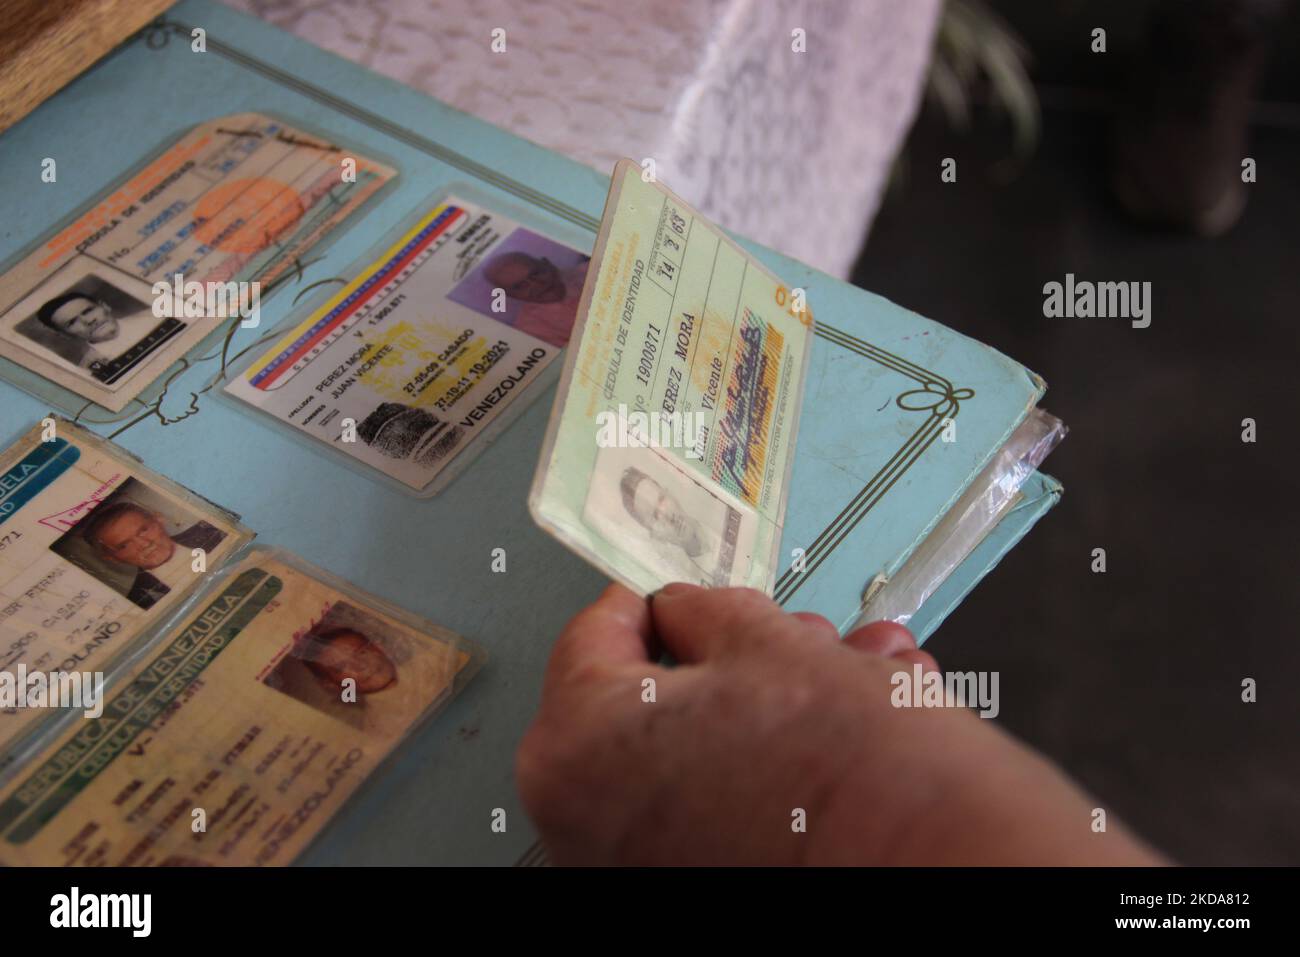 Detailed picture of the different identification cards that Juan Vicente Mora has had throughout his life. San JosÃ© de Bolivar, January 24, 2022. The oldest man in the world is the Venezuelan elder Juan Vicente Mora, with an age of 112 years and 253 days, officially recognized by the Guinness Book of World Records, who informed that he is officially the 'oldest' male person in the world. He was born on May 27, 1909 in El Cobre, TÃ¡chira State, Venezuela. Juan Vicente has 28 grandchildren, 41 great-grandchildren and 112 great-great-grandchildren, the Guinness Book said on Twitter. (Photo by Jo Stock Photo